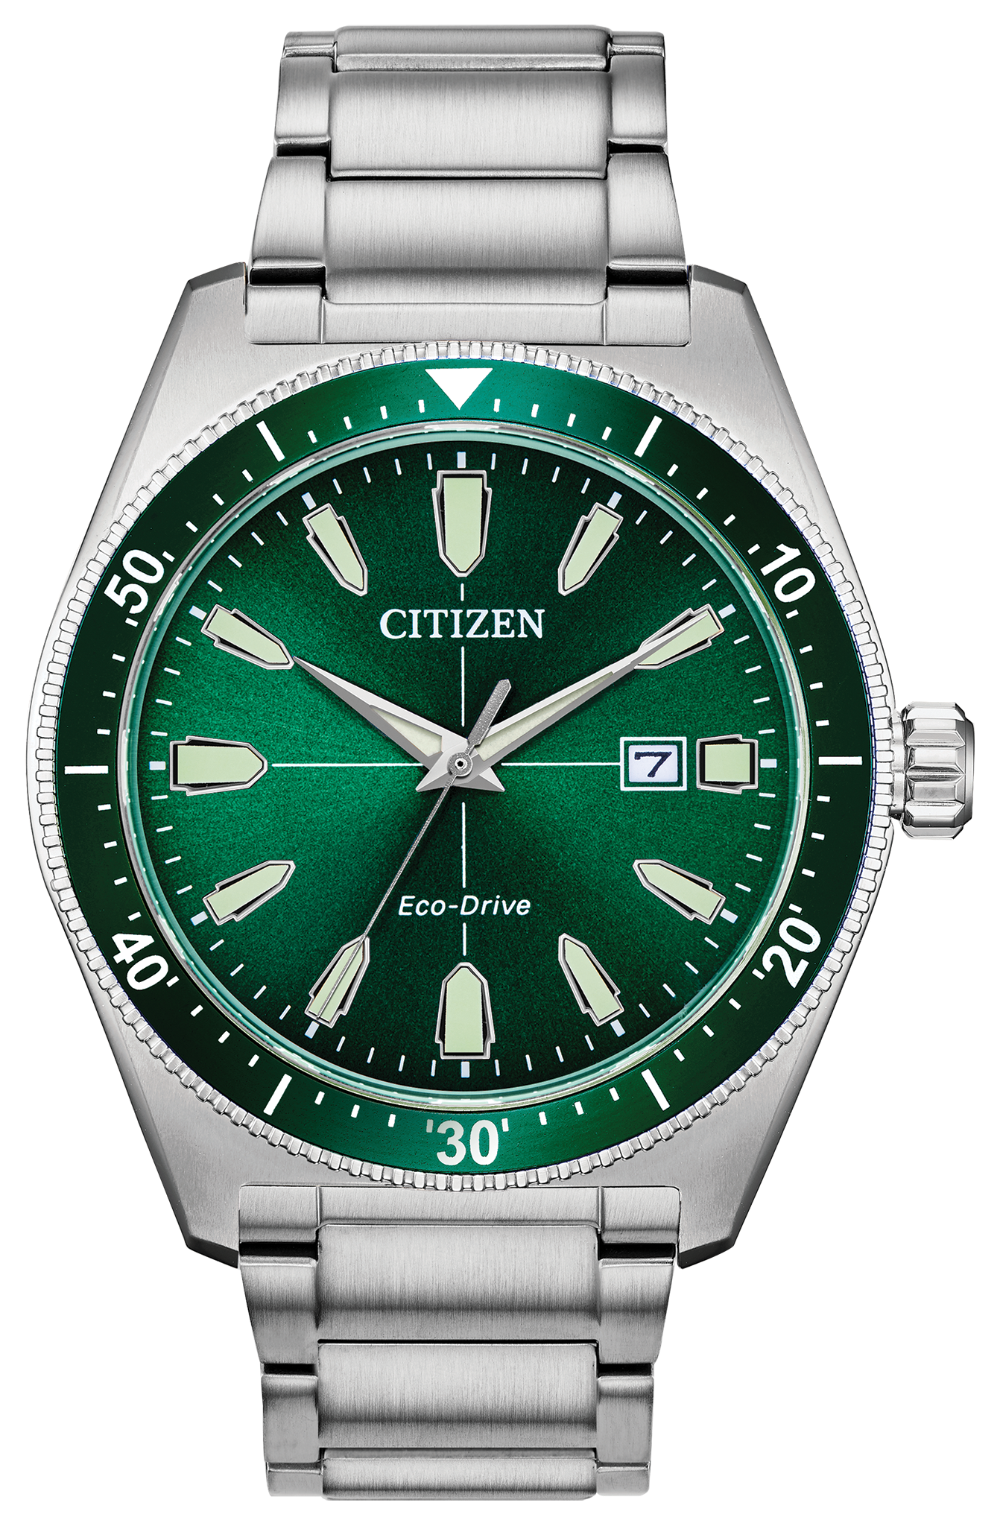 Citizen Vintage Brycen Sport stainless steel case with pine green dial and bezel Eco-Drive technology